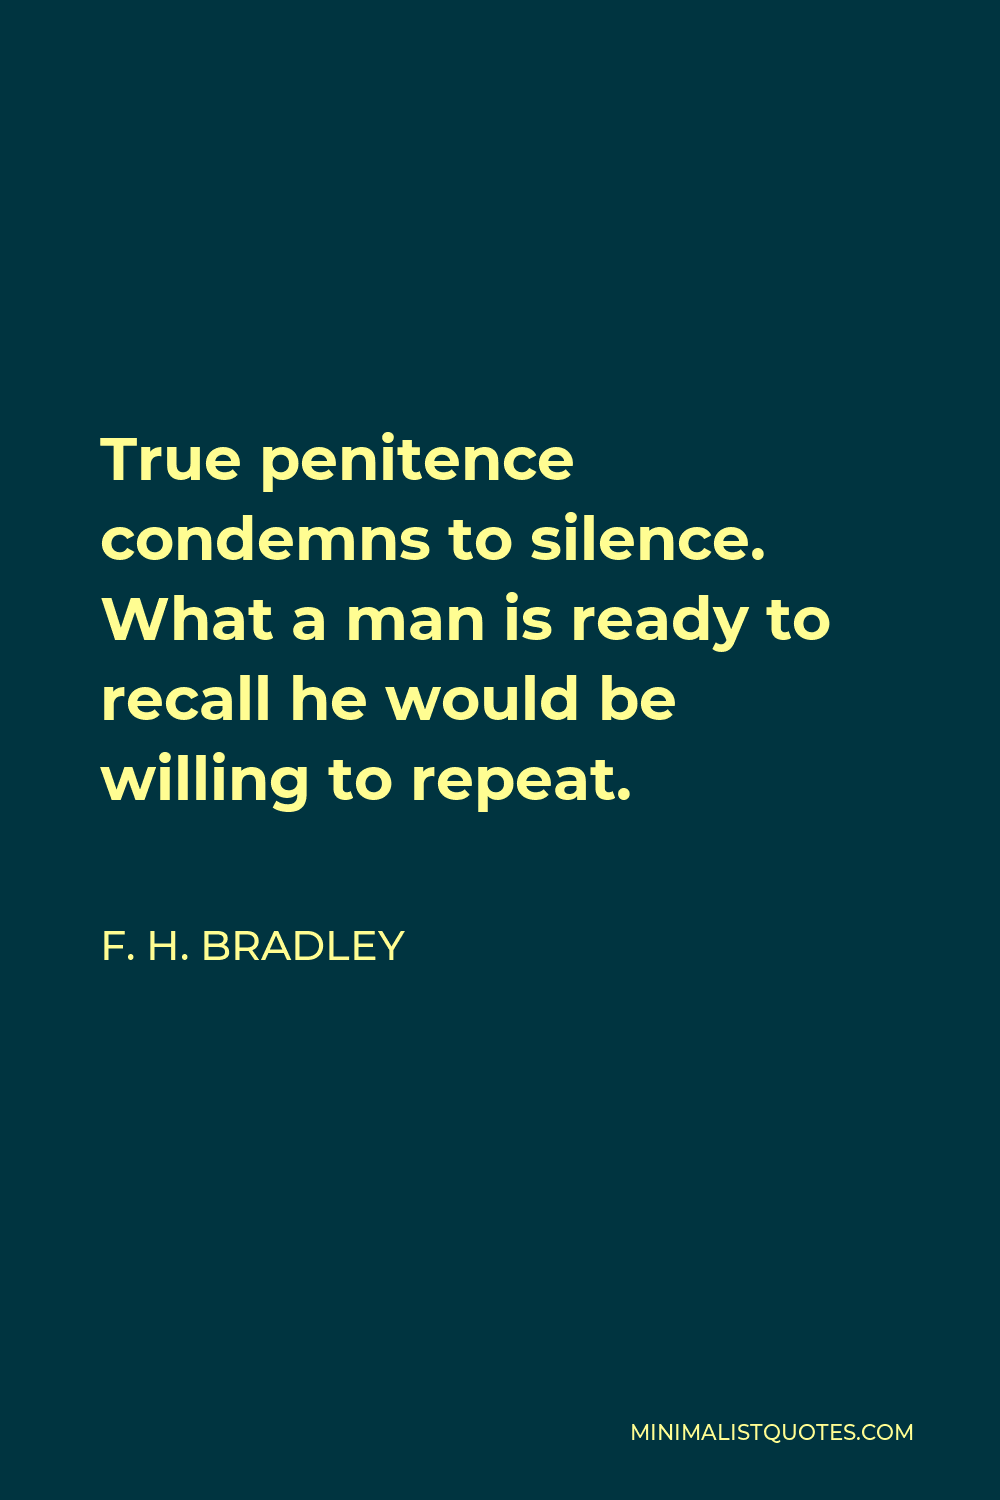 F. H. Bradley Quote - True penitence condemns to silence. What a man is ready to recall he would be willing to repeat.